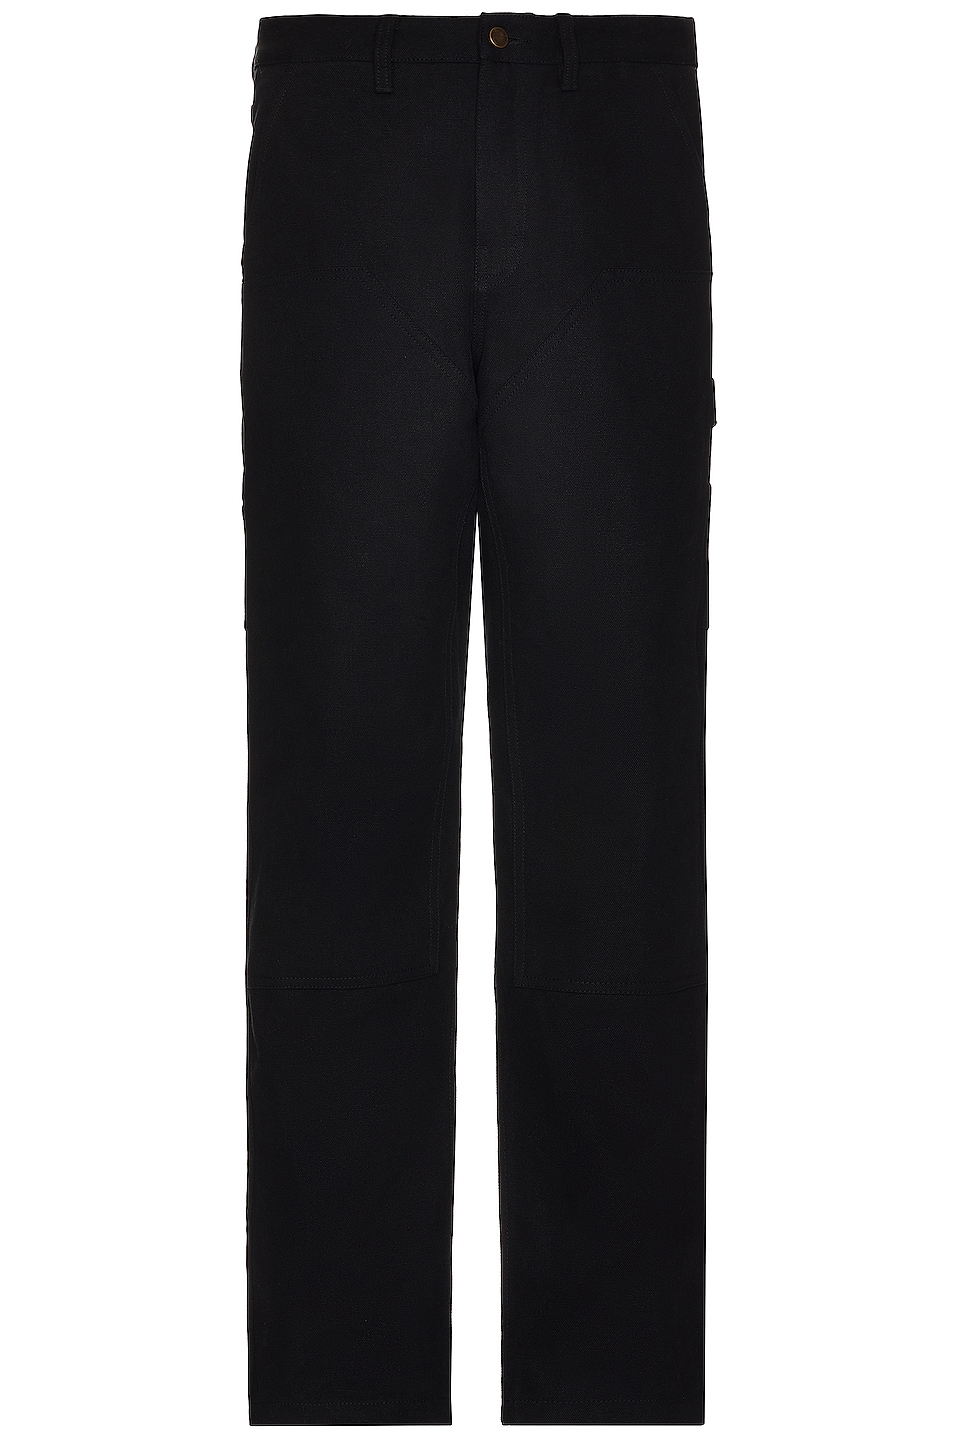 Image 1 of Honor The Gift Carpenter Pant in Black